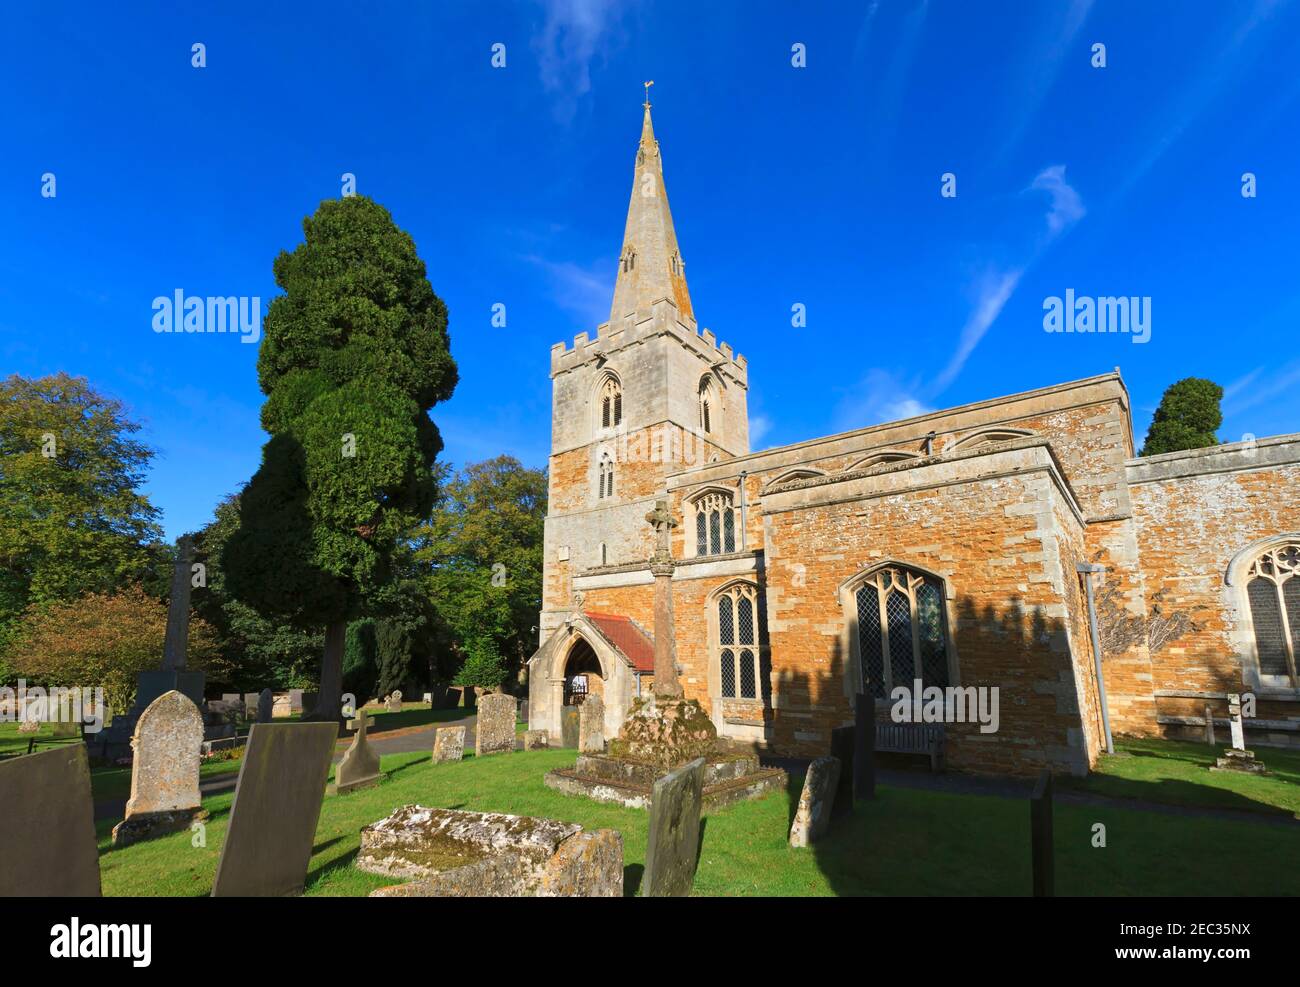 St Peter's Church, Wymondham, Leicestershire. Historic church in perpendicular style with a 13th century spire. Stock Photo